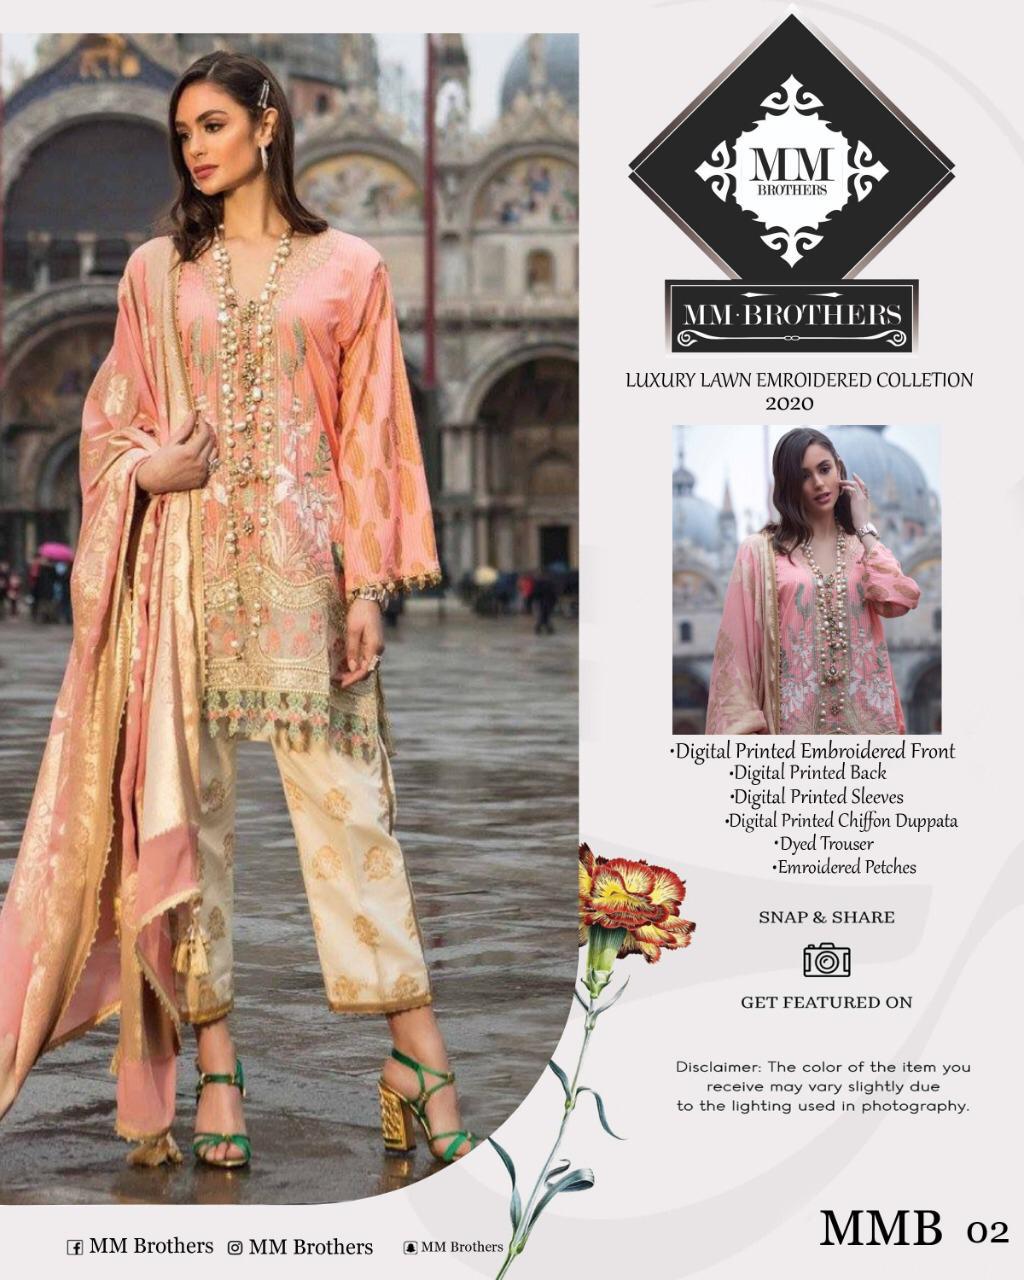 MM Brothers Luxury lawn embroidered collection 2020